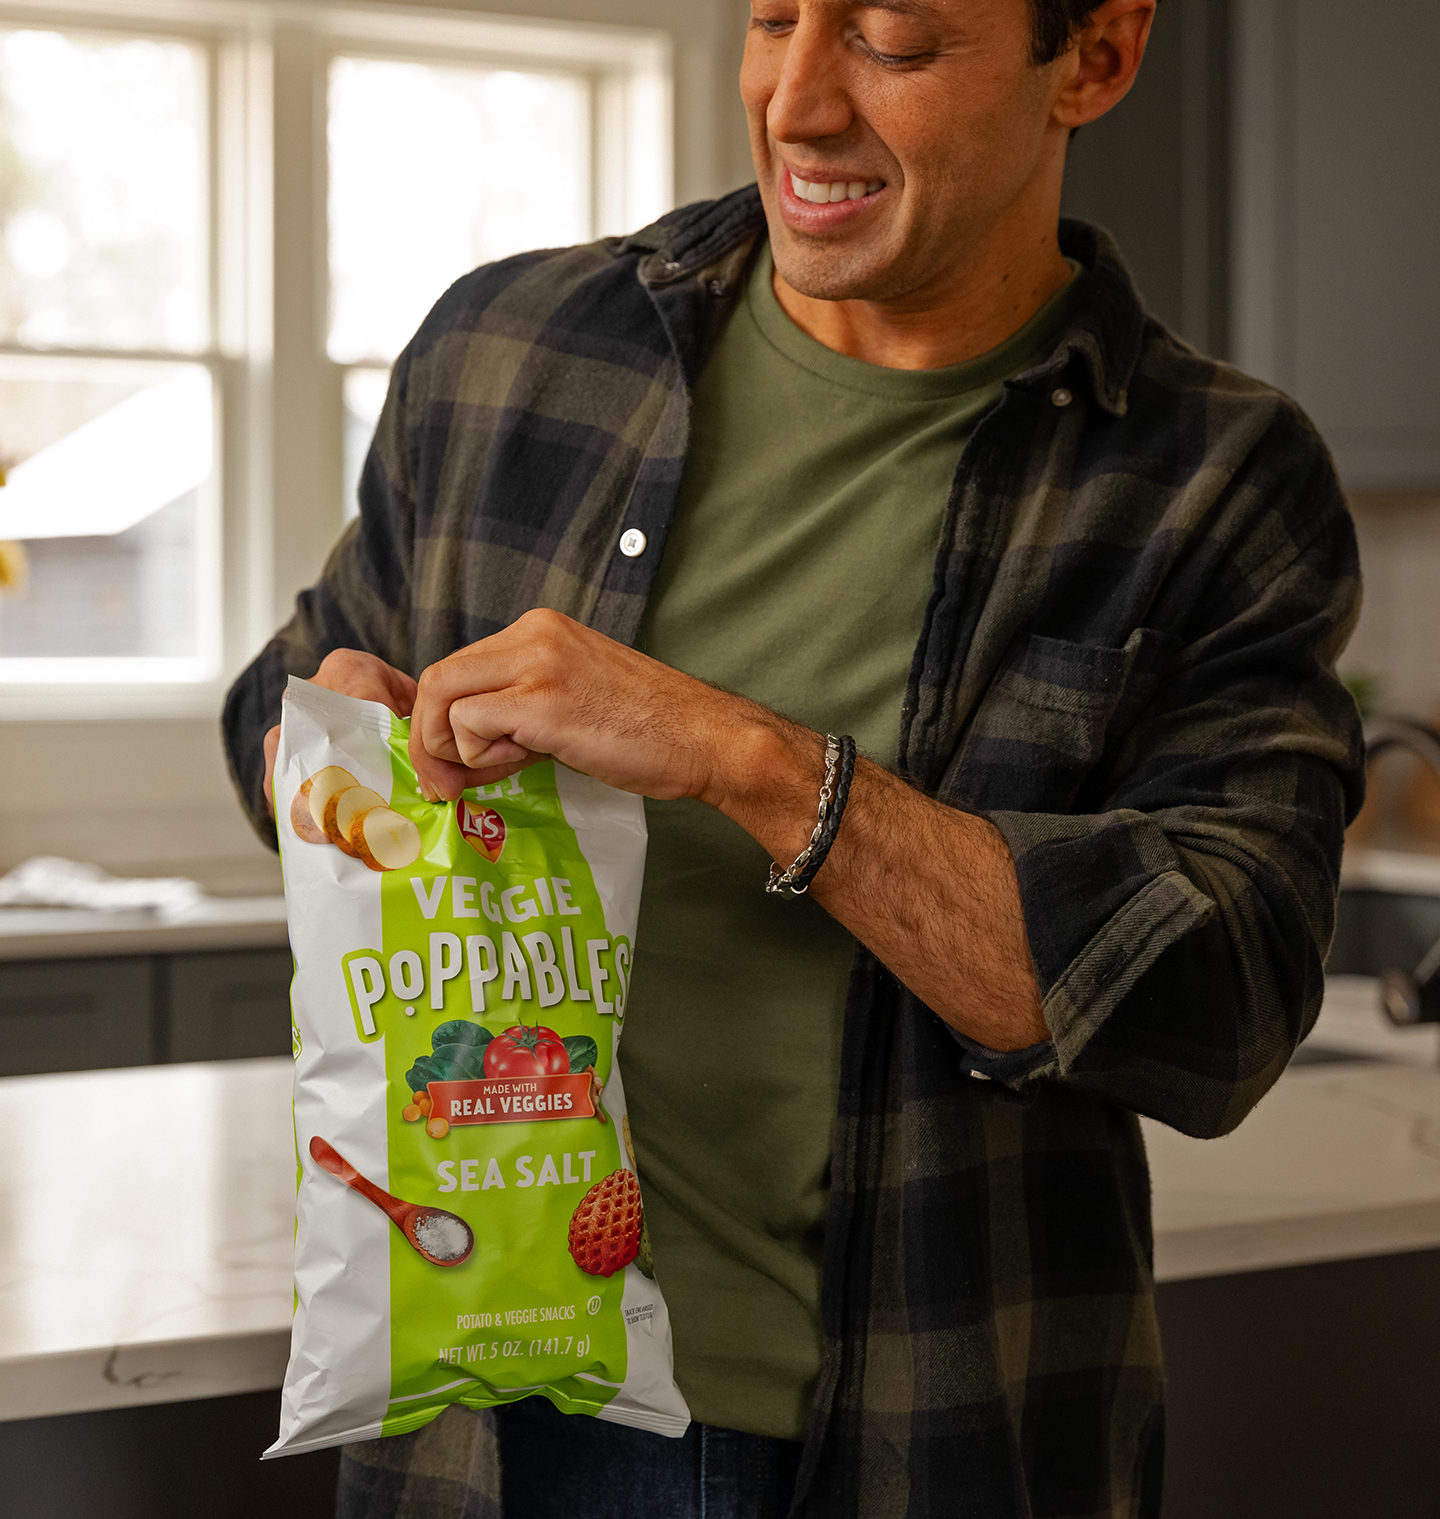 Man opening a bag of Lay's Veggie Poppables